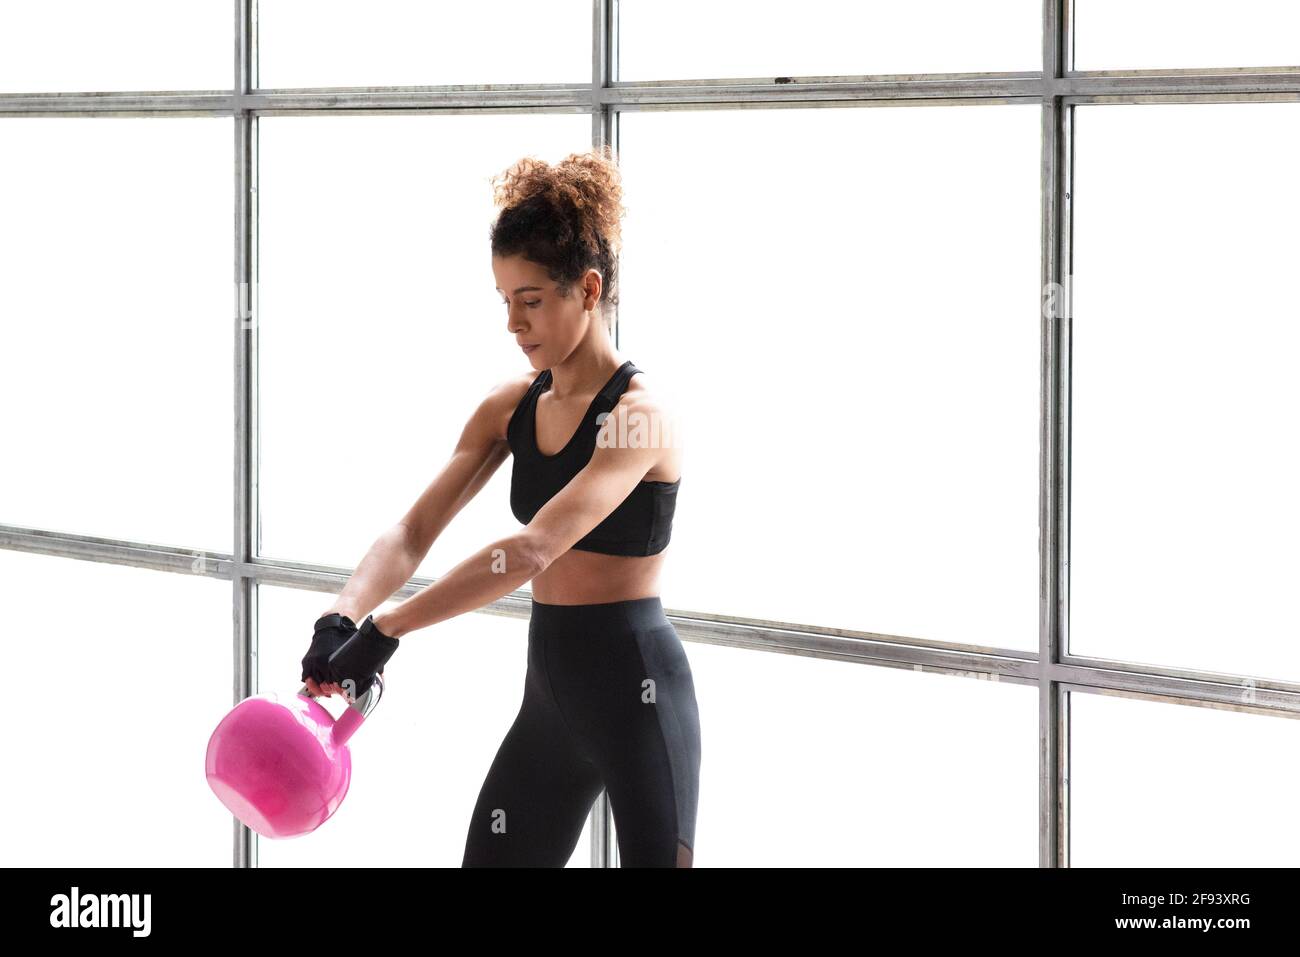 Royalty-Free photo: Close up photo of pink and black kettlebell and running  shoes